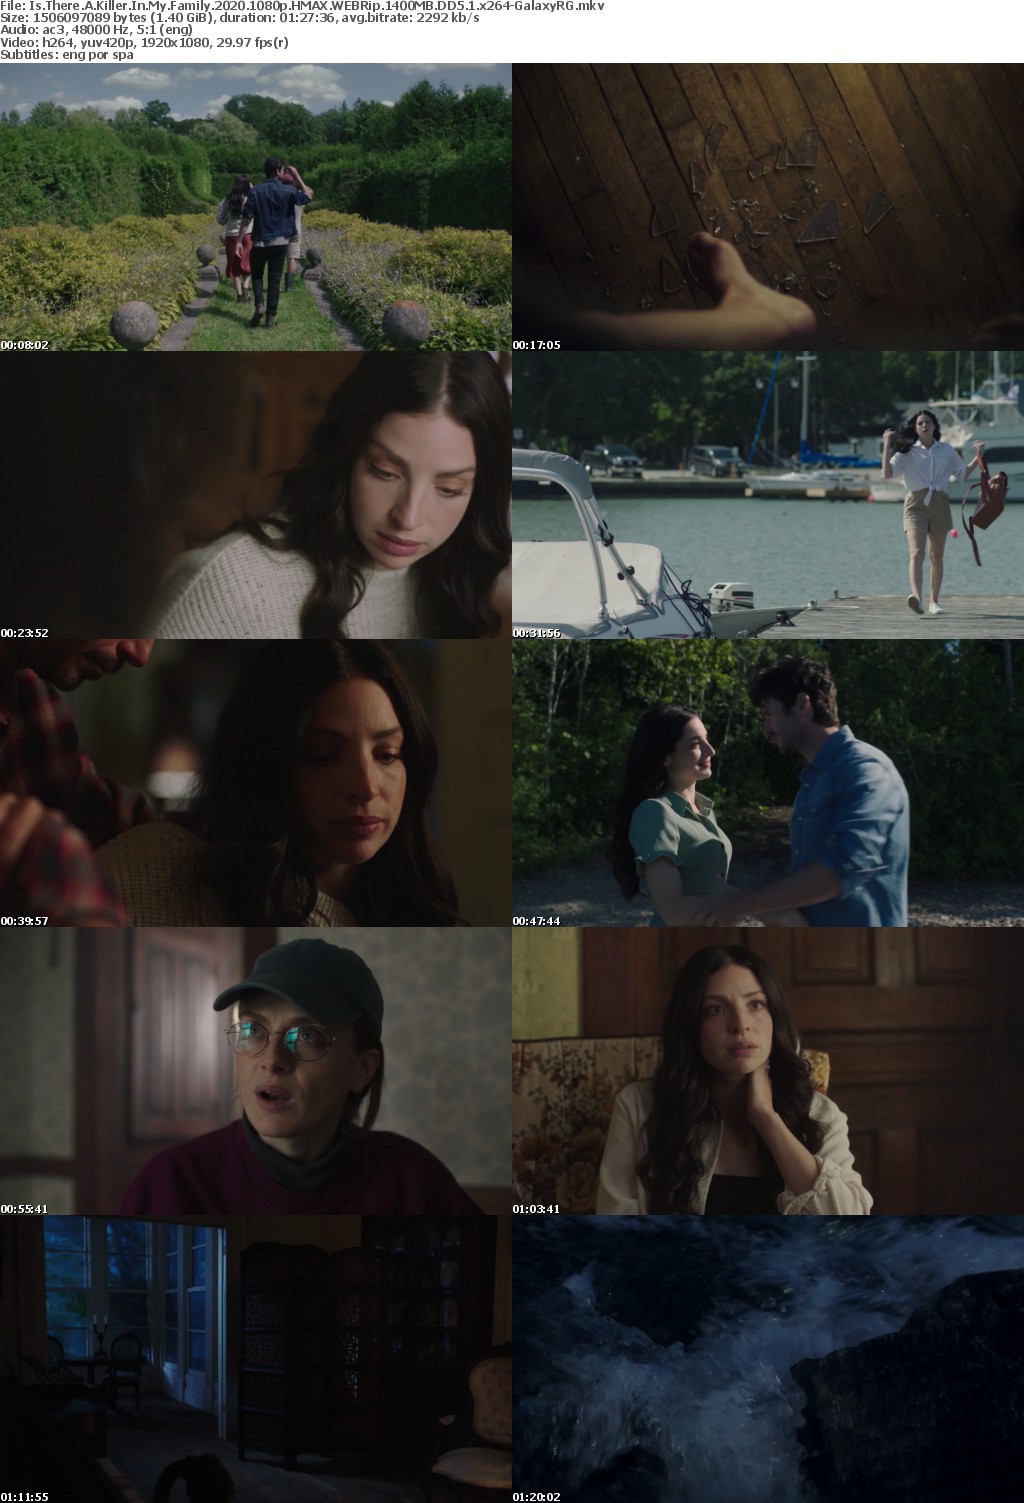 Is There A Killer In My Family 2020 1080p HMAX WEBRip 1400MB DD5 1 x264-GalaxyRG